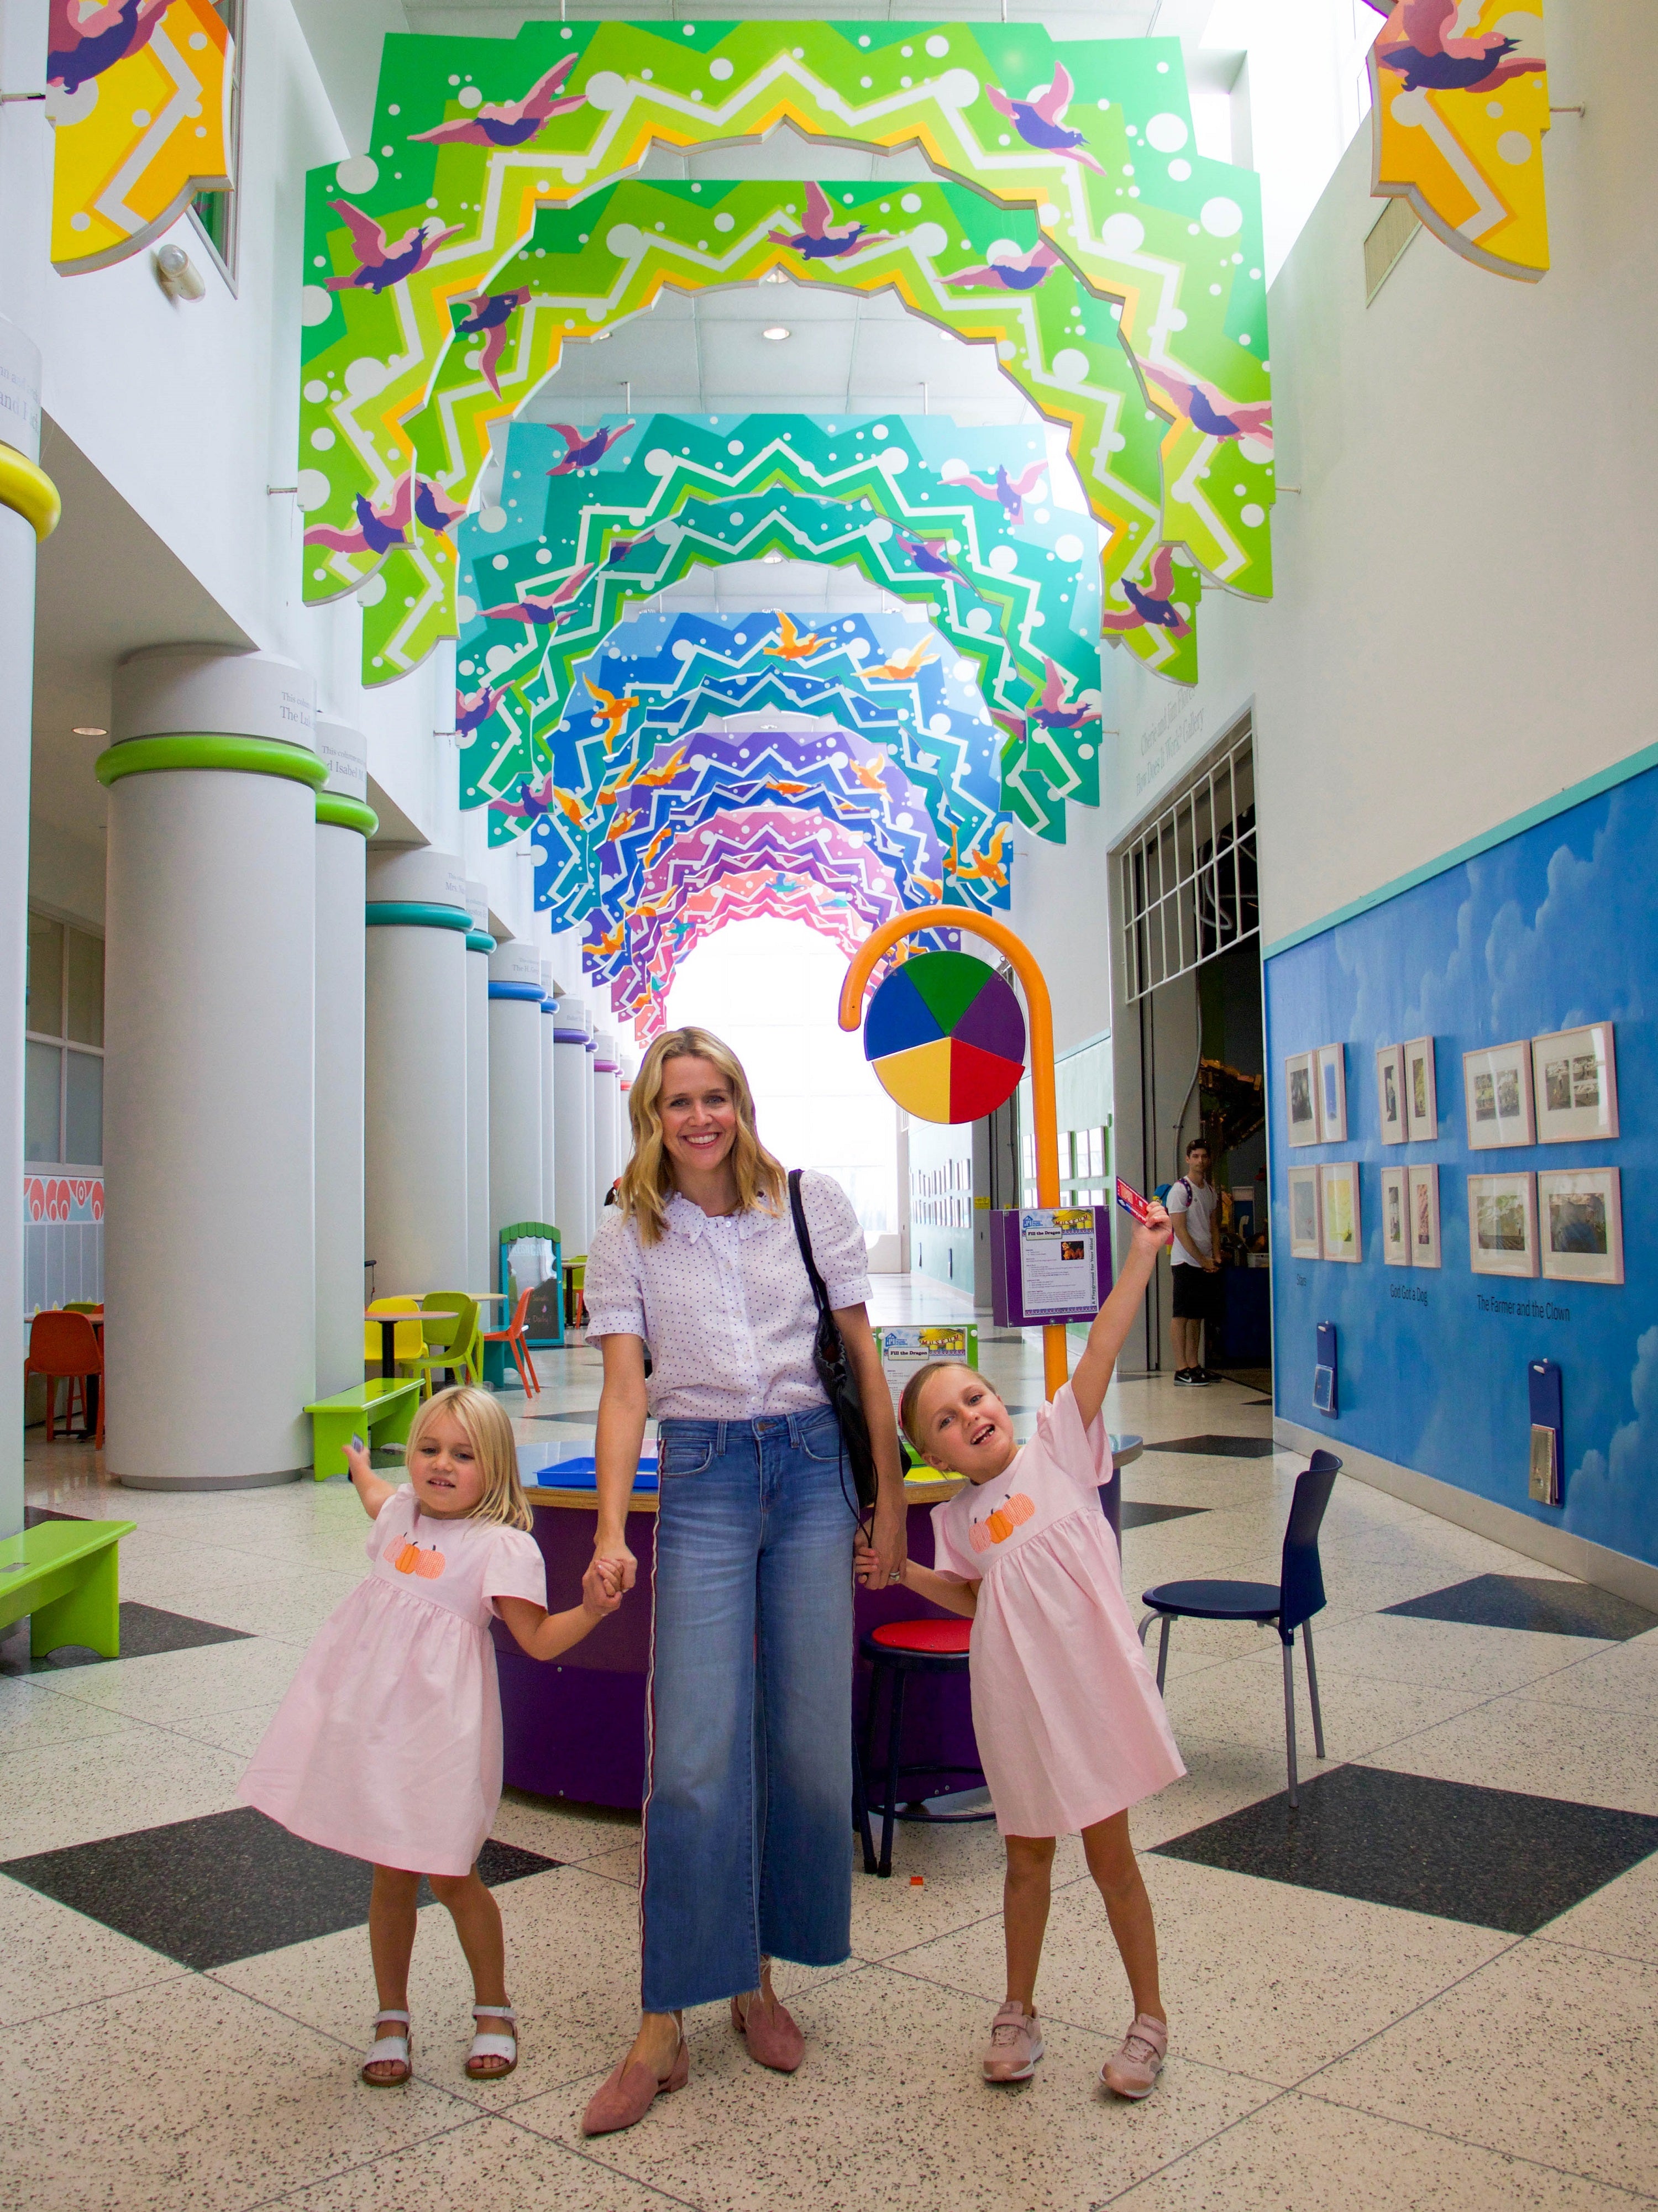 #giveback | spotlight on The Children's Museum + Rolex giveaway!